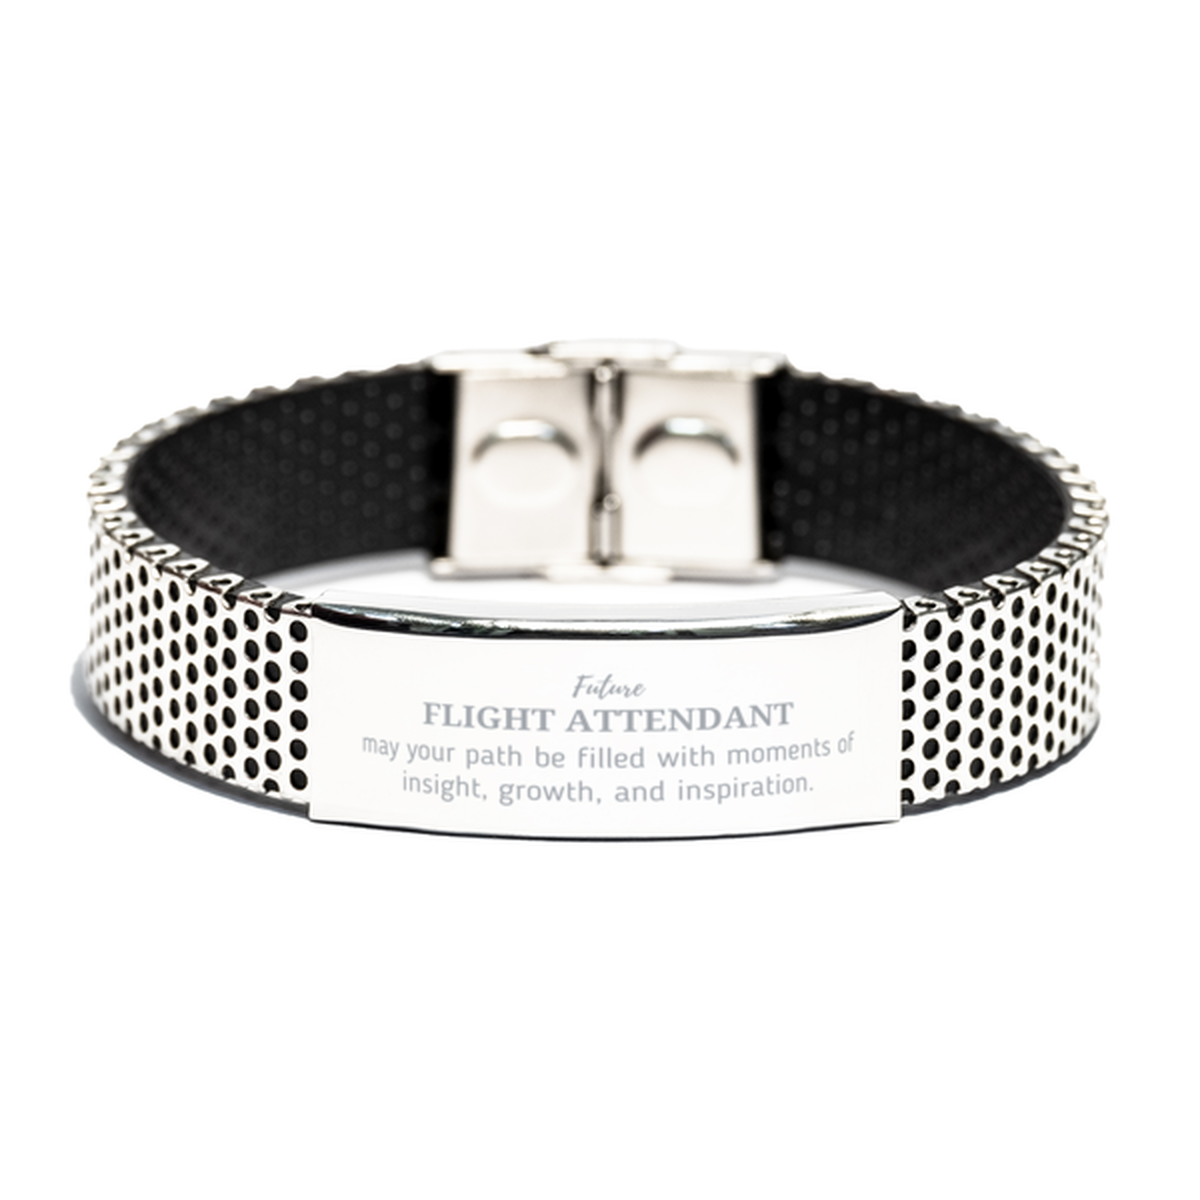 Future Flight Attendant Gifts, May your path be filled with moments of insight, Graduation Gifts for New Flight Attendant, Christmas Unique Stainless Steel Bracelet For Men, Women, Friends